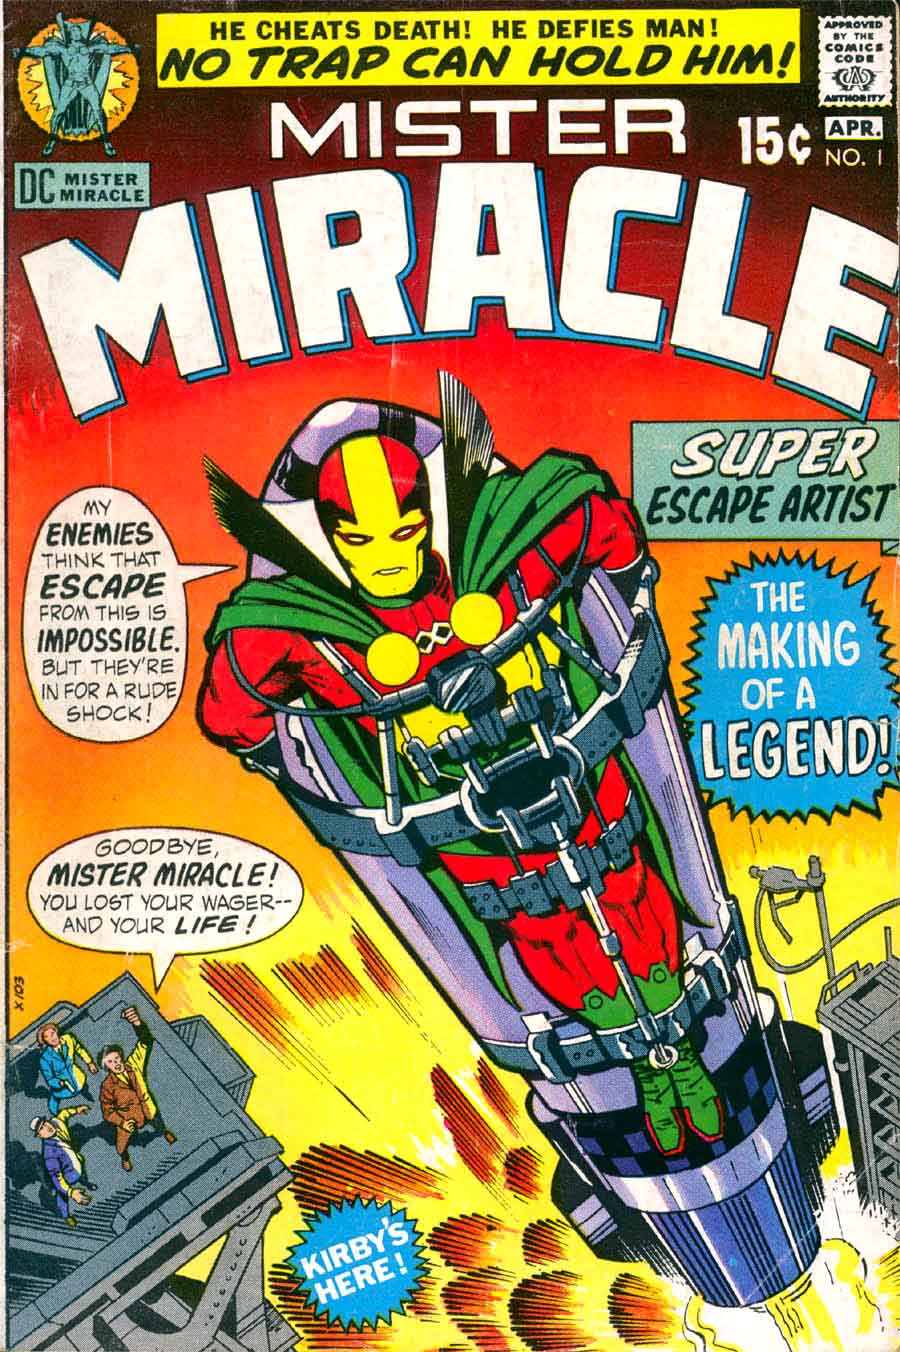 Mister Miracle v1 #1 dc 1970s bronze age comic book cover art by Jack Kirby